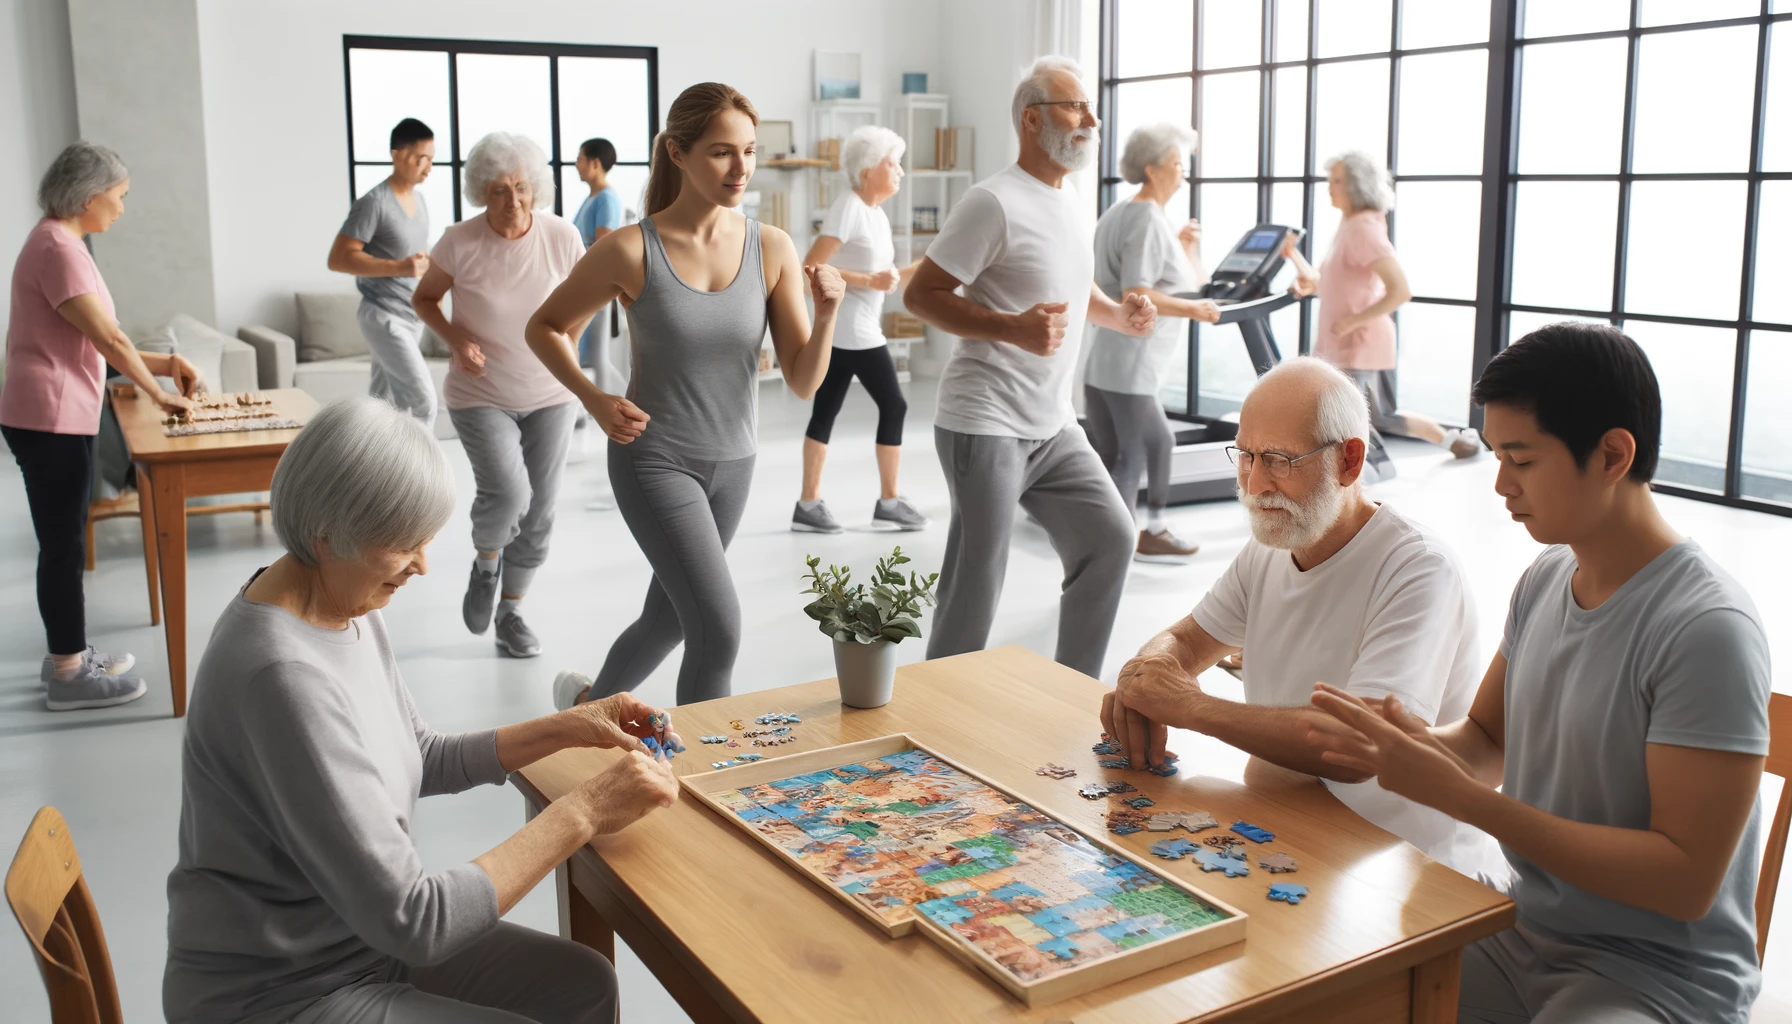 Breakthrough Study Combines Unorthodox Mental and Physical Games to Combat Alzheimer’s